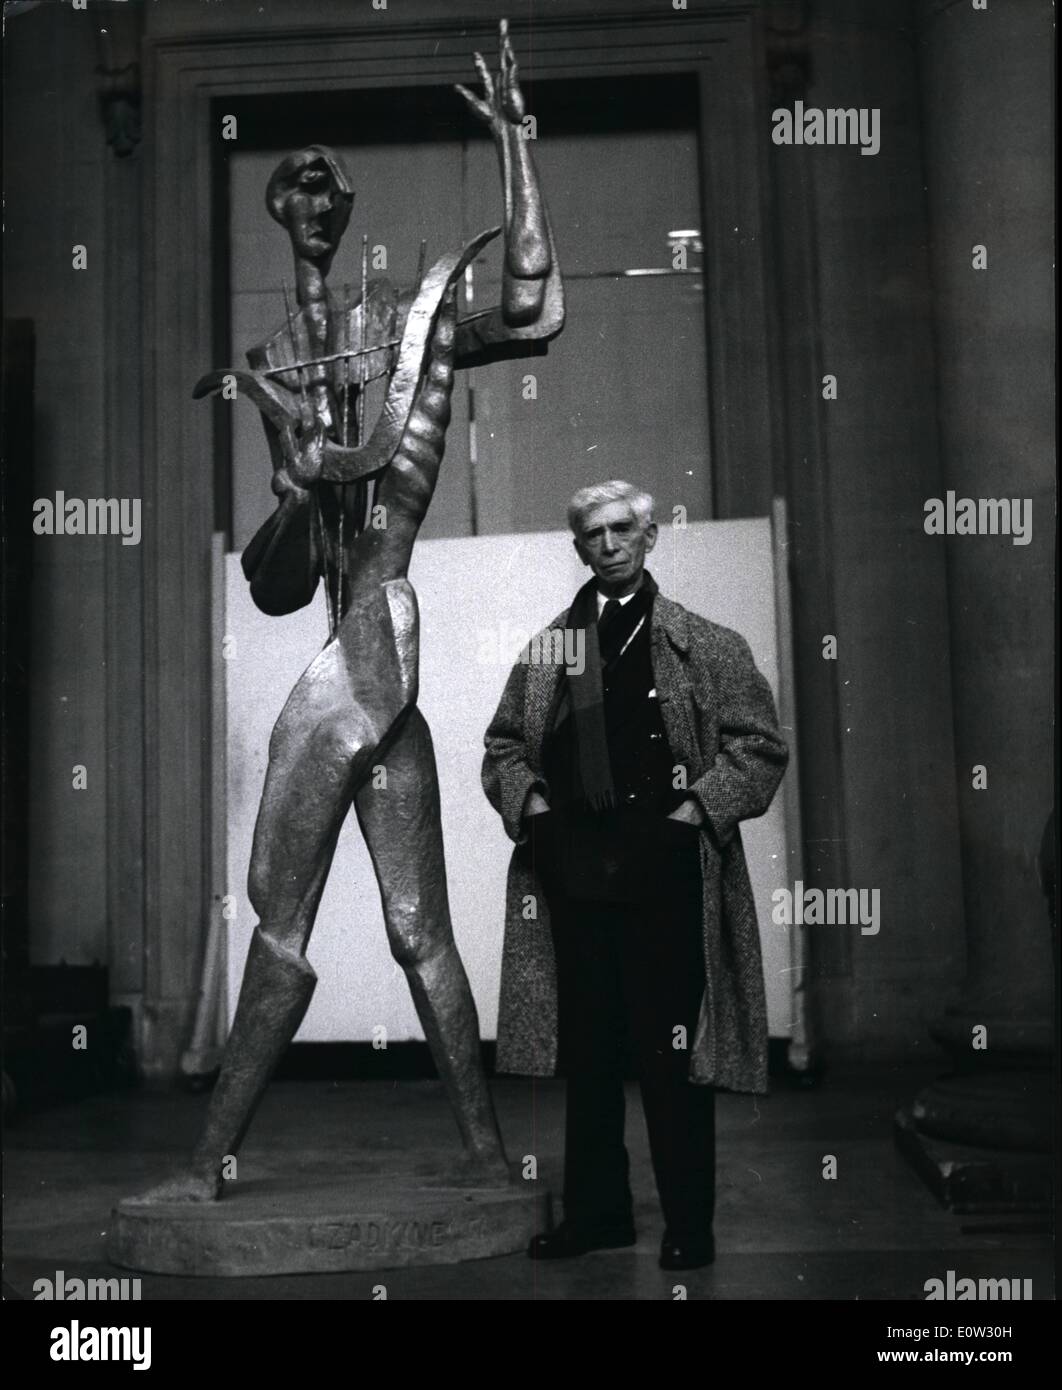 Jan. 01, 1961 - Works by Russian born sculptor - on show in London: Eighty-three exhibits by Russian born OSSIP ZADKINE - said to be one of the greatest modern sculptors of the day-are being shown at the Tate Gallery in London. This is the first major exhibition of his works here - but they have been seen in New York and Paris etc. The exhibition shows his progress as a sculptor from 1934 to the present day. Photo shows OSSIP ZADKINE the sculptor with ''Orpheus'' a sculpture in bronze-at the Tate Gallery. This is an example of his later work-and is more than six feet tall. Stock Photo